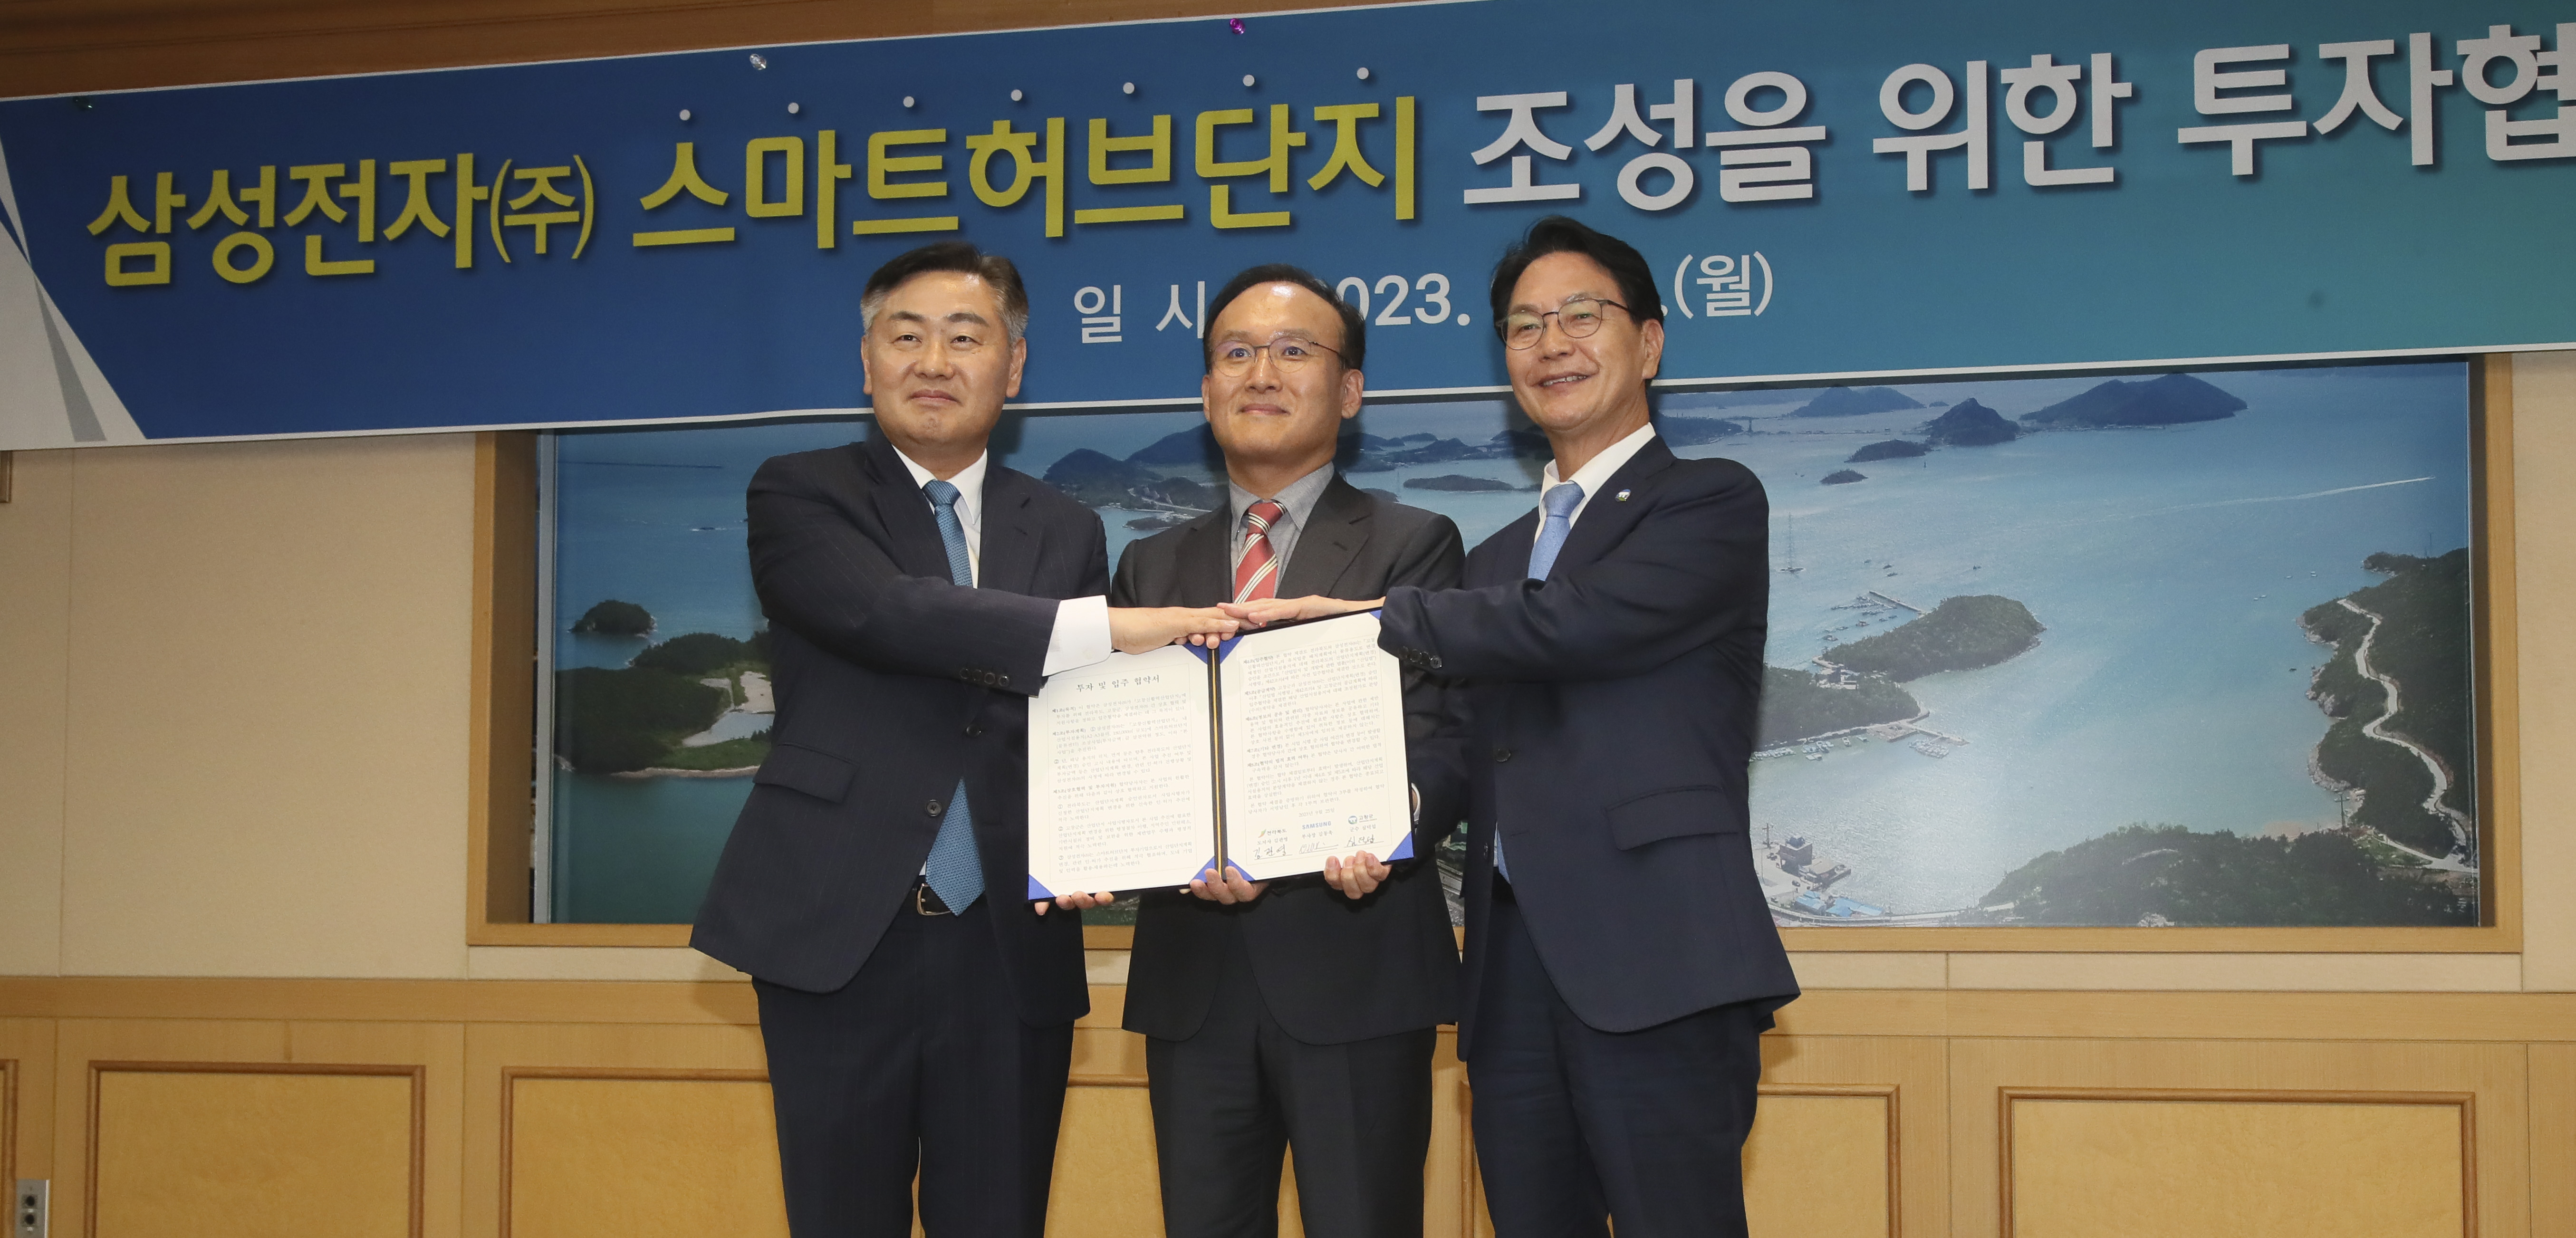 Samsung Electronics Co., Ltd. invests at Gochang to Construct a Smart Hub Complex (Temporary Name) image(1)